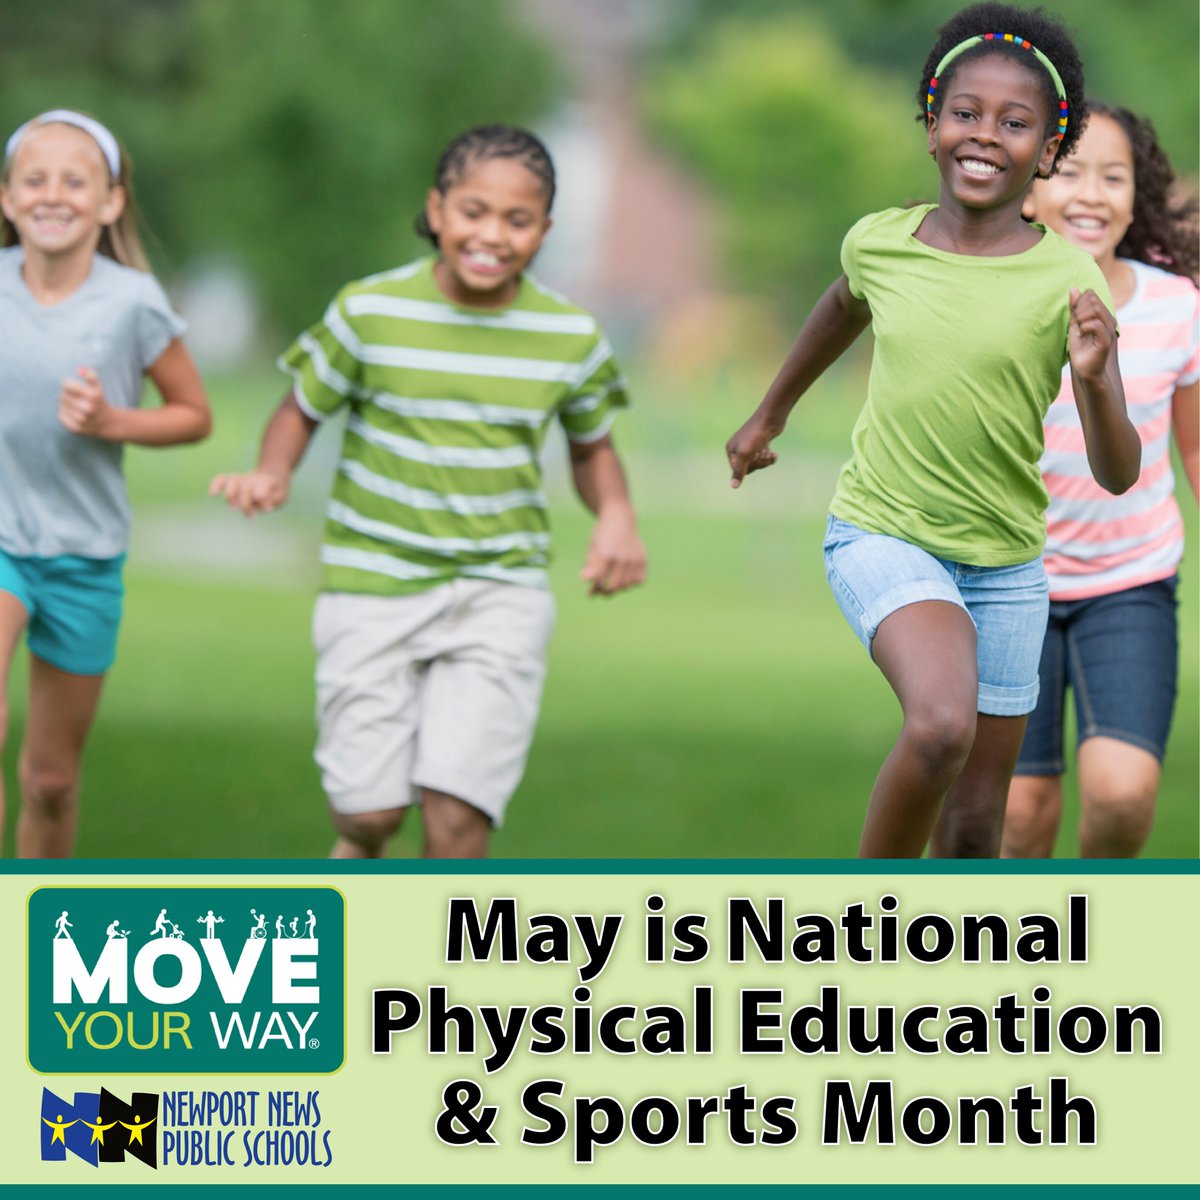 It’s National Physical Education and Sports Month! 💪❤️ In addition to helping children grow up strong and healthy, at least 60 minutes of physical activity a day promotes better sleep, mood and grades. 💤😊📚 Learn more at health.gov/moveyourway #Moveyourway